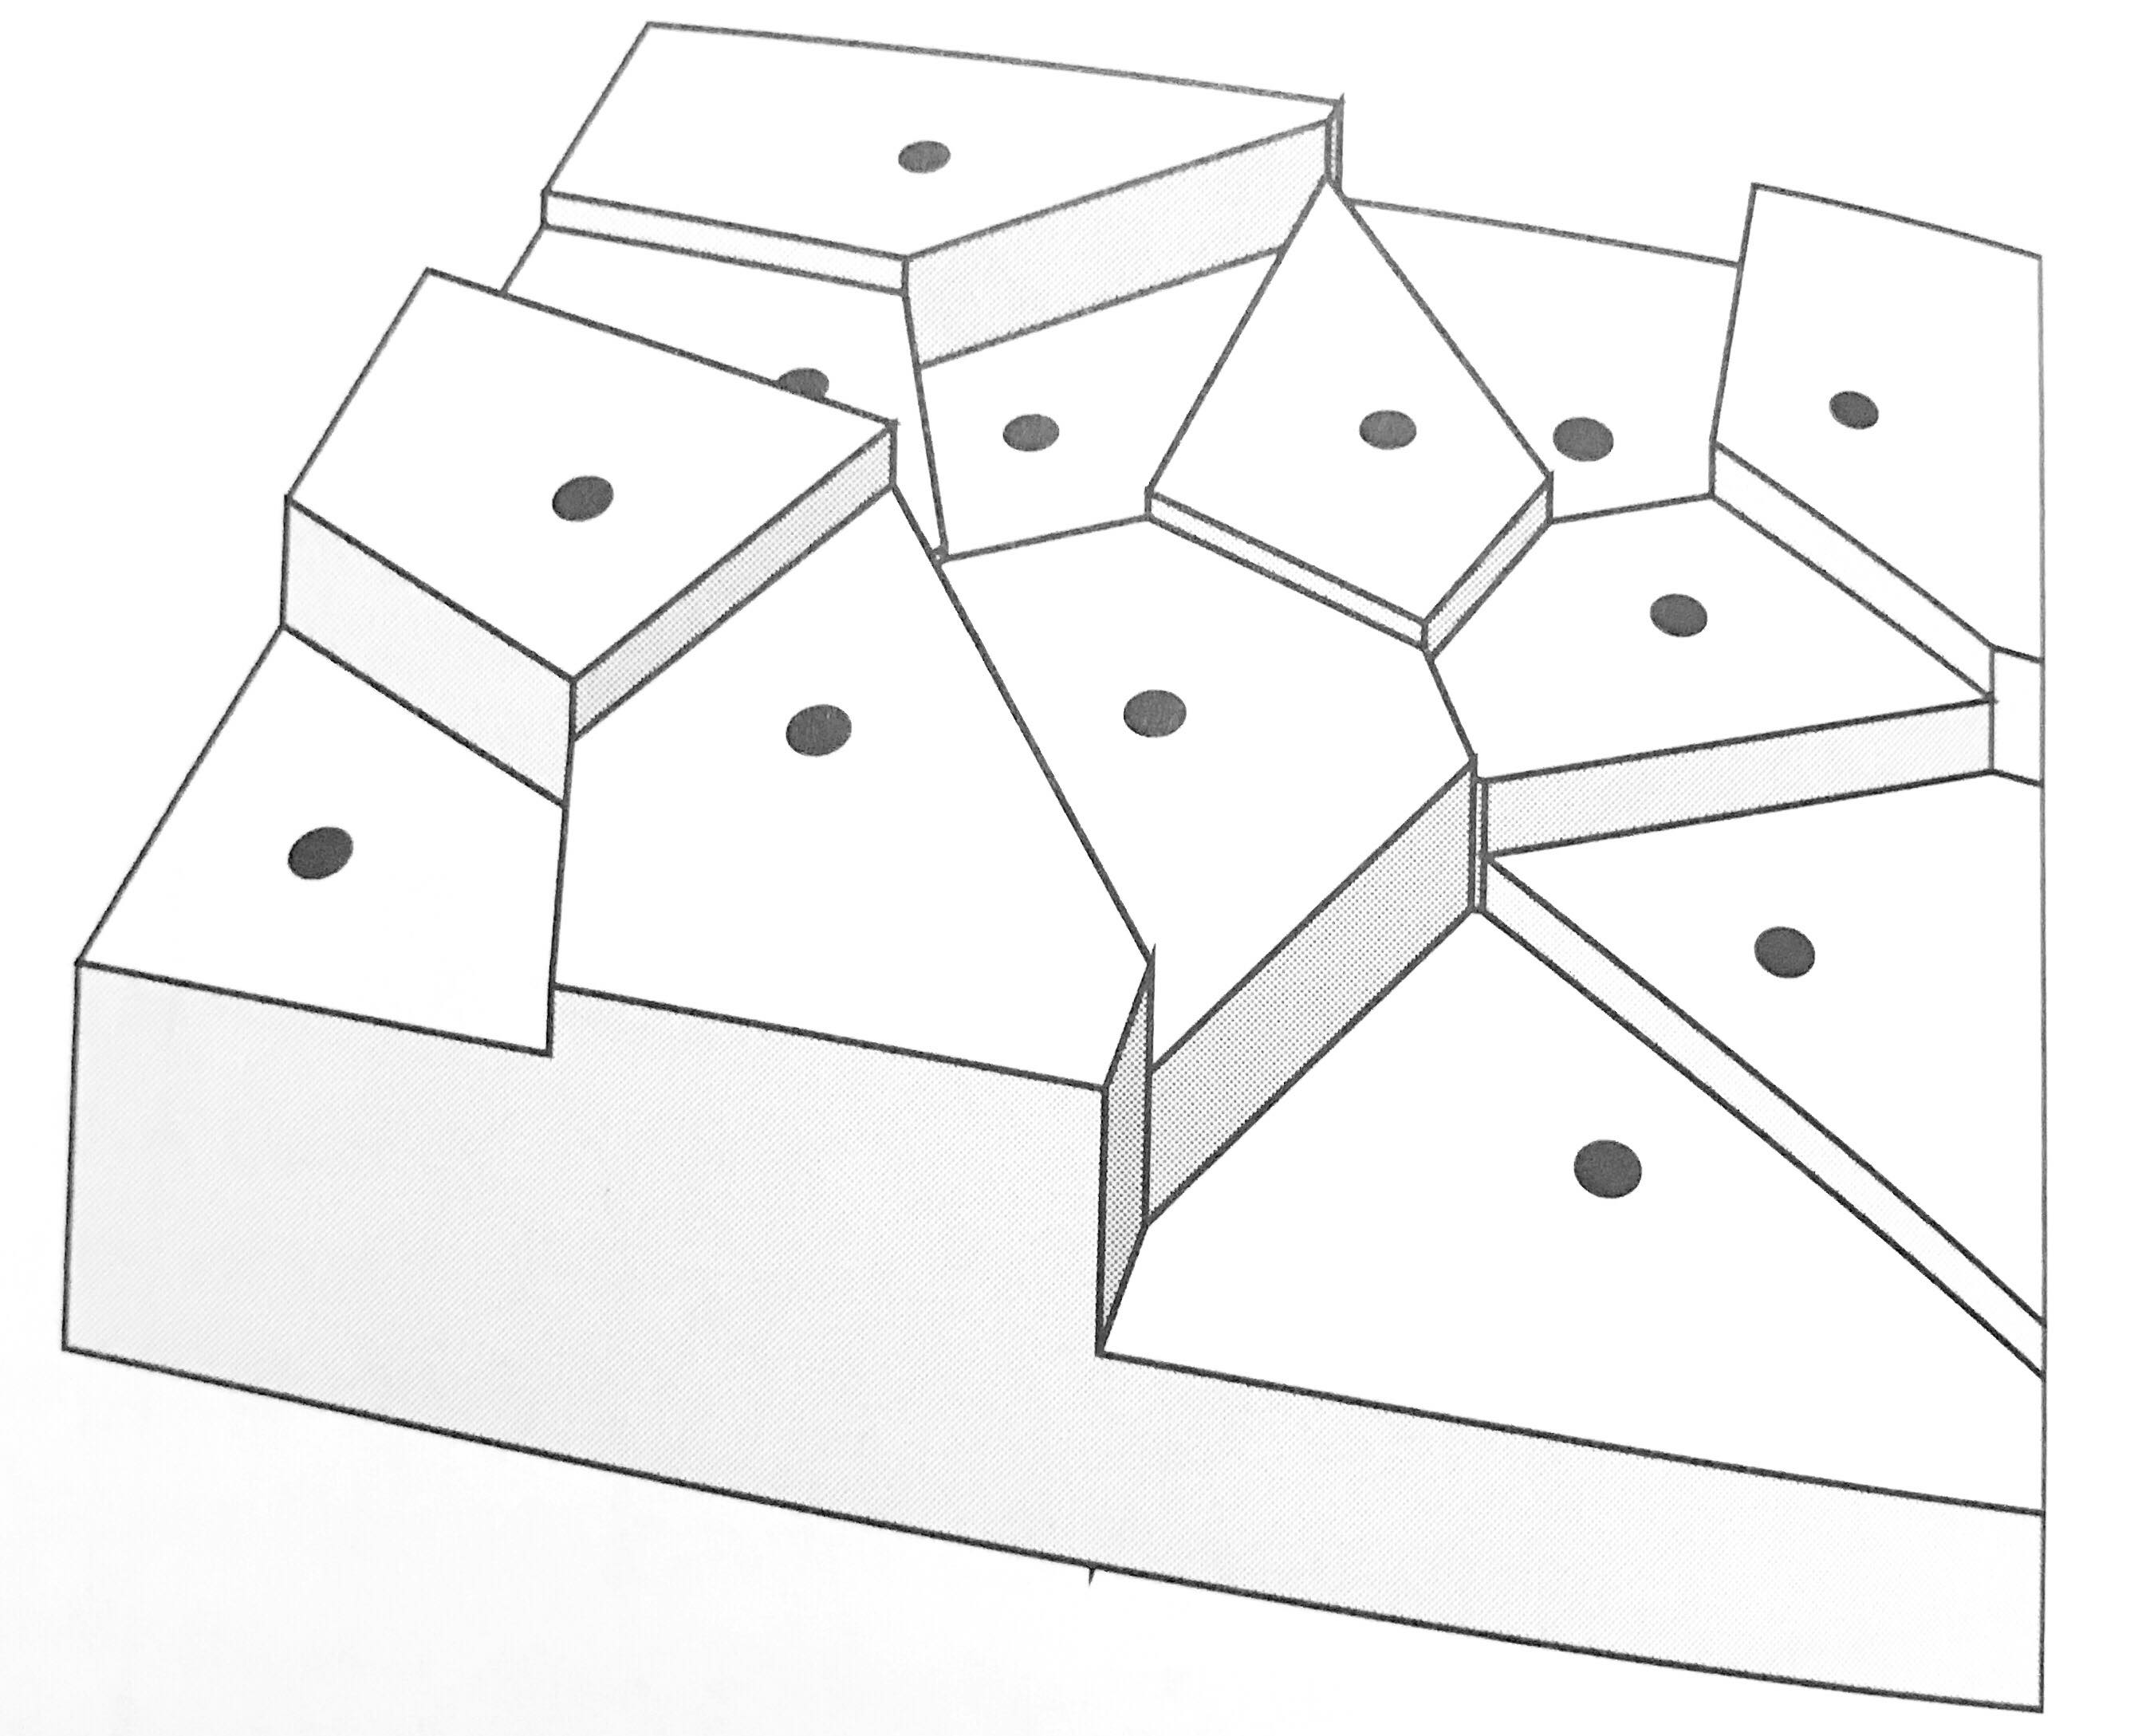 Figure 2. A field according to Voronoi polygons